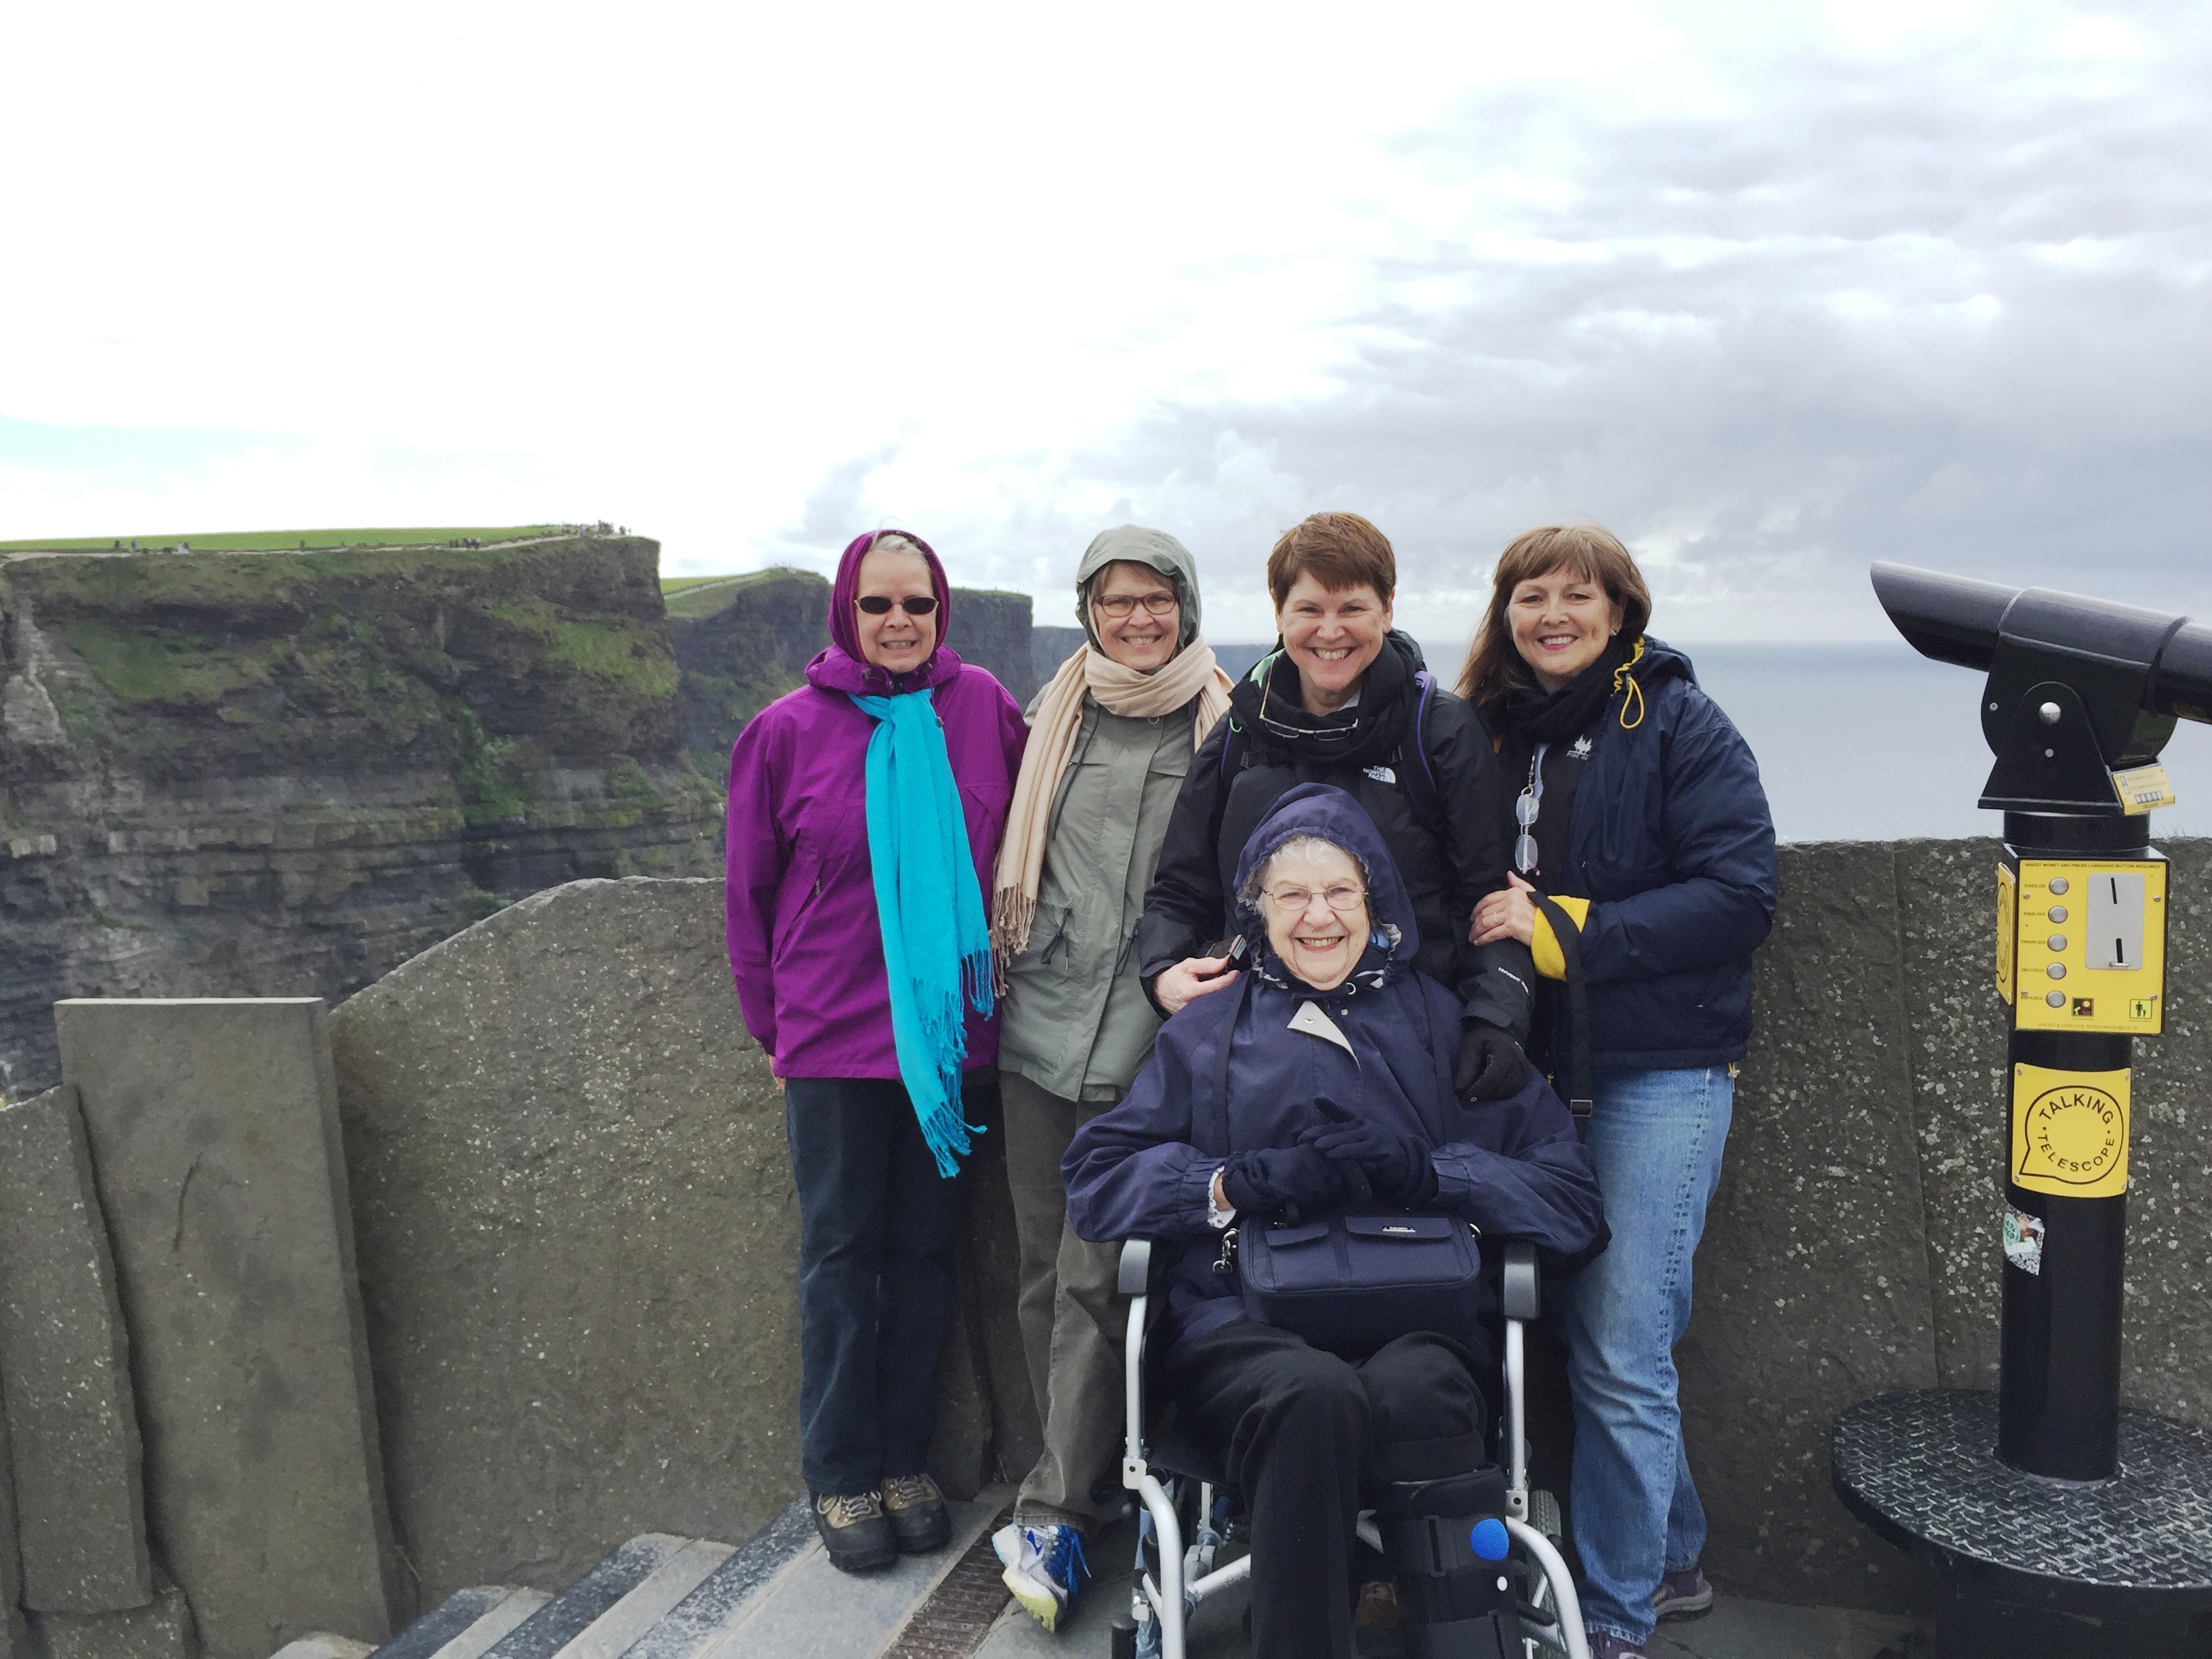 From left: Annis, Sara, Molly and Martha with Roberta at the Cliffs of Moher